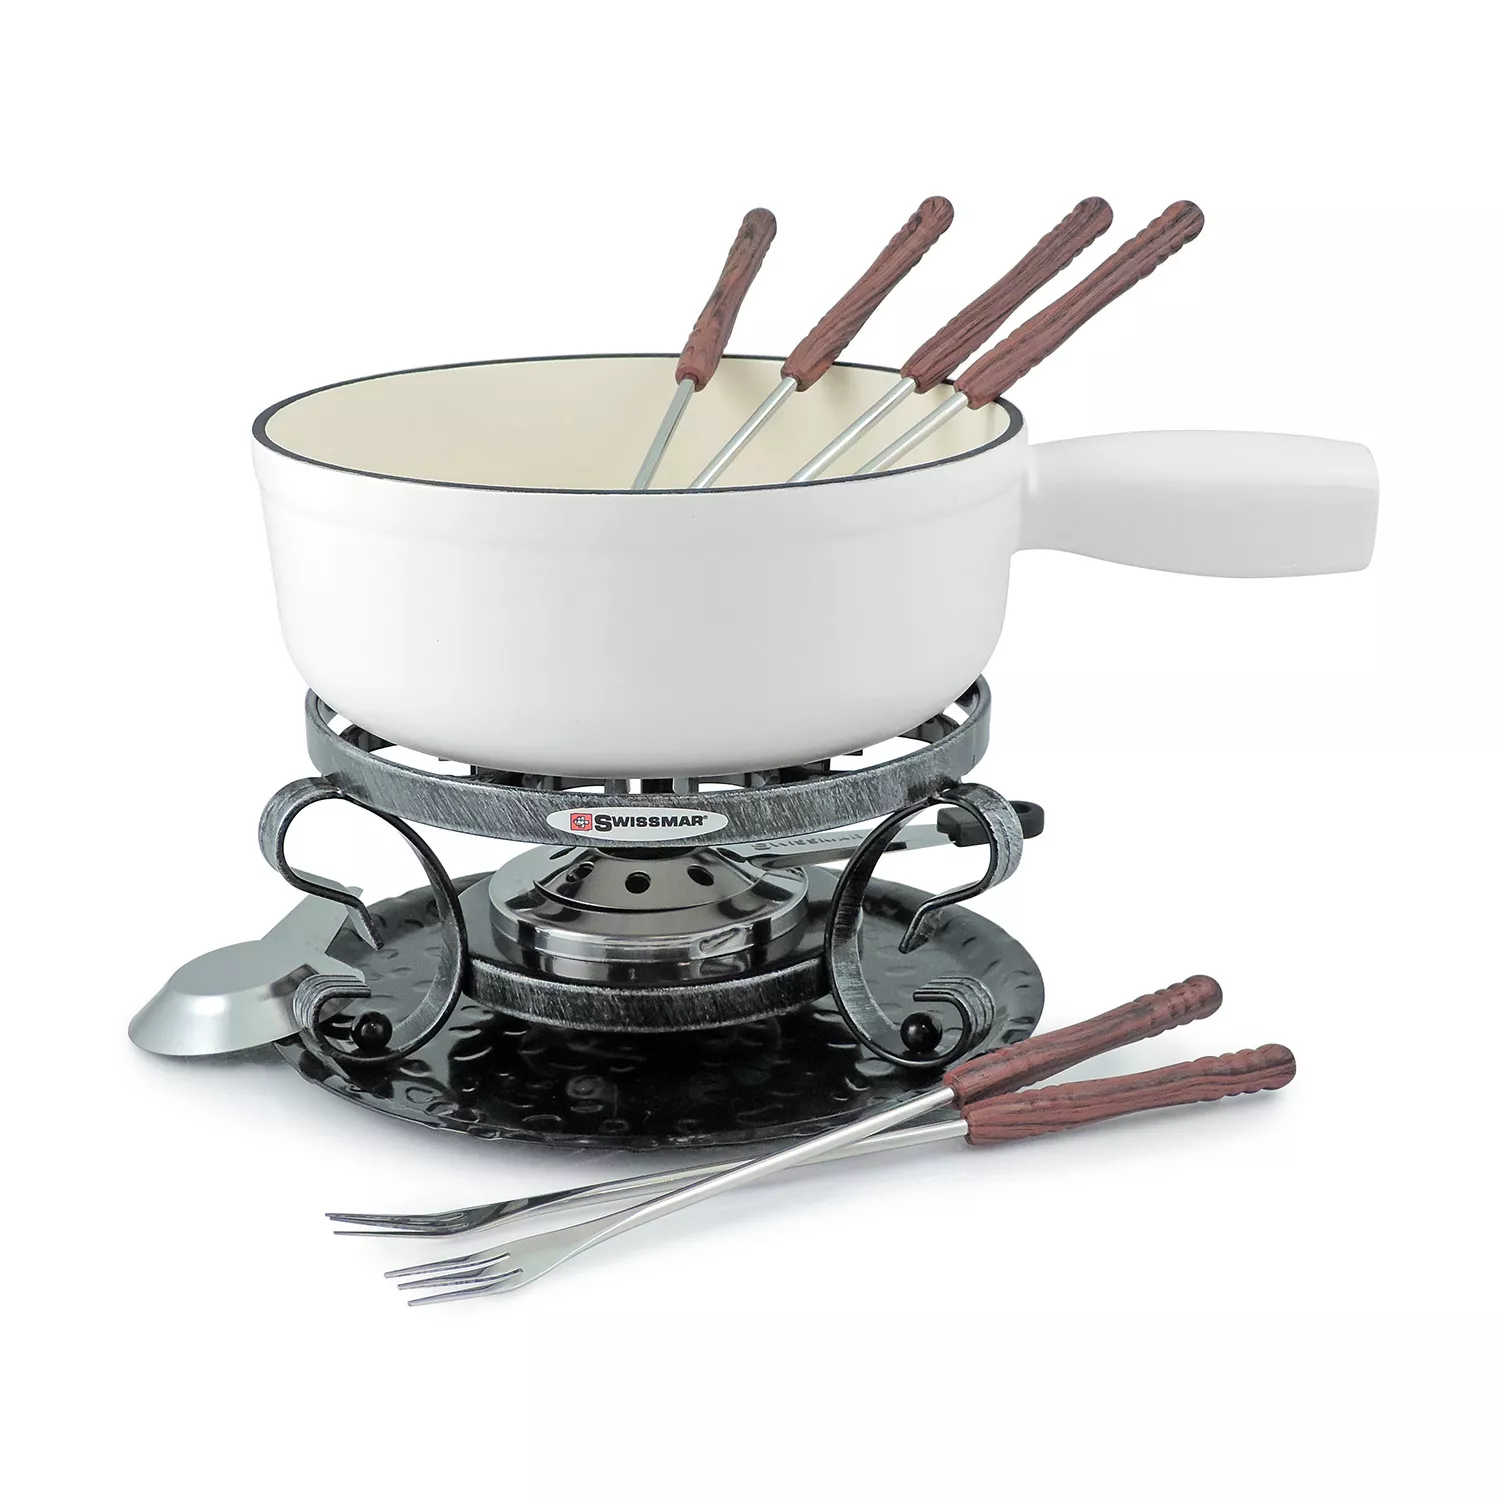 Artestia Electric Chocolate & Cheese Fondue Set with Two Pots, Serve 8 Persons (Stainless